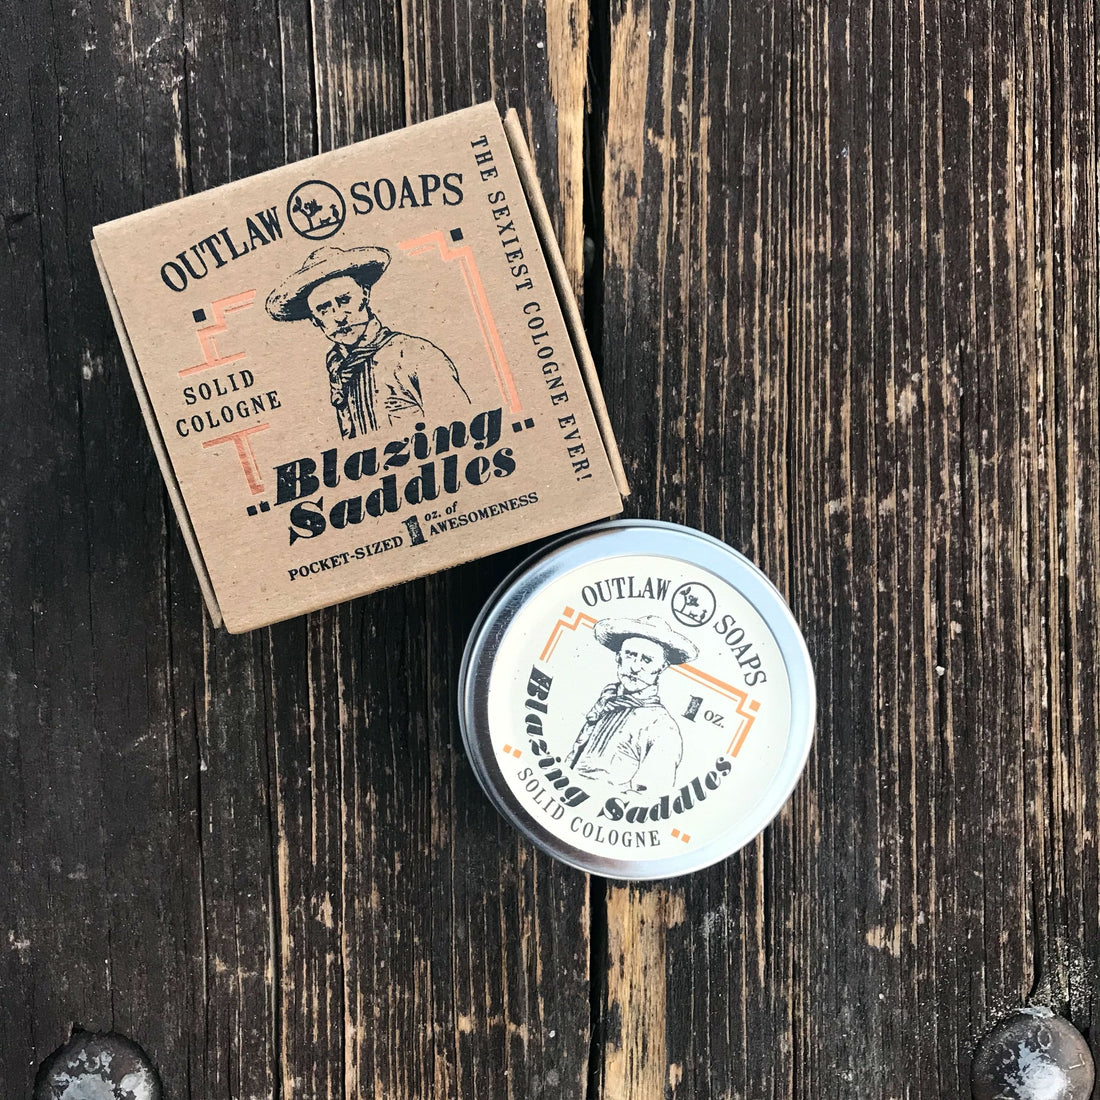 Outlaw Solid Cologne Sample Pack : Try our award-winning solid colognes at a nice price